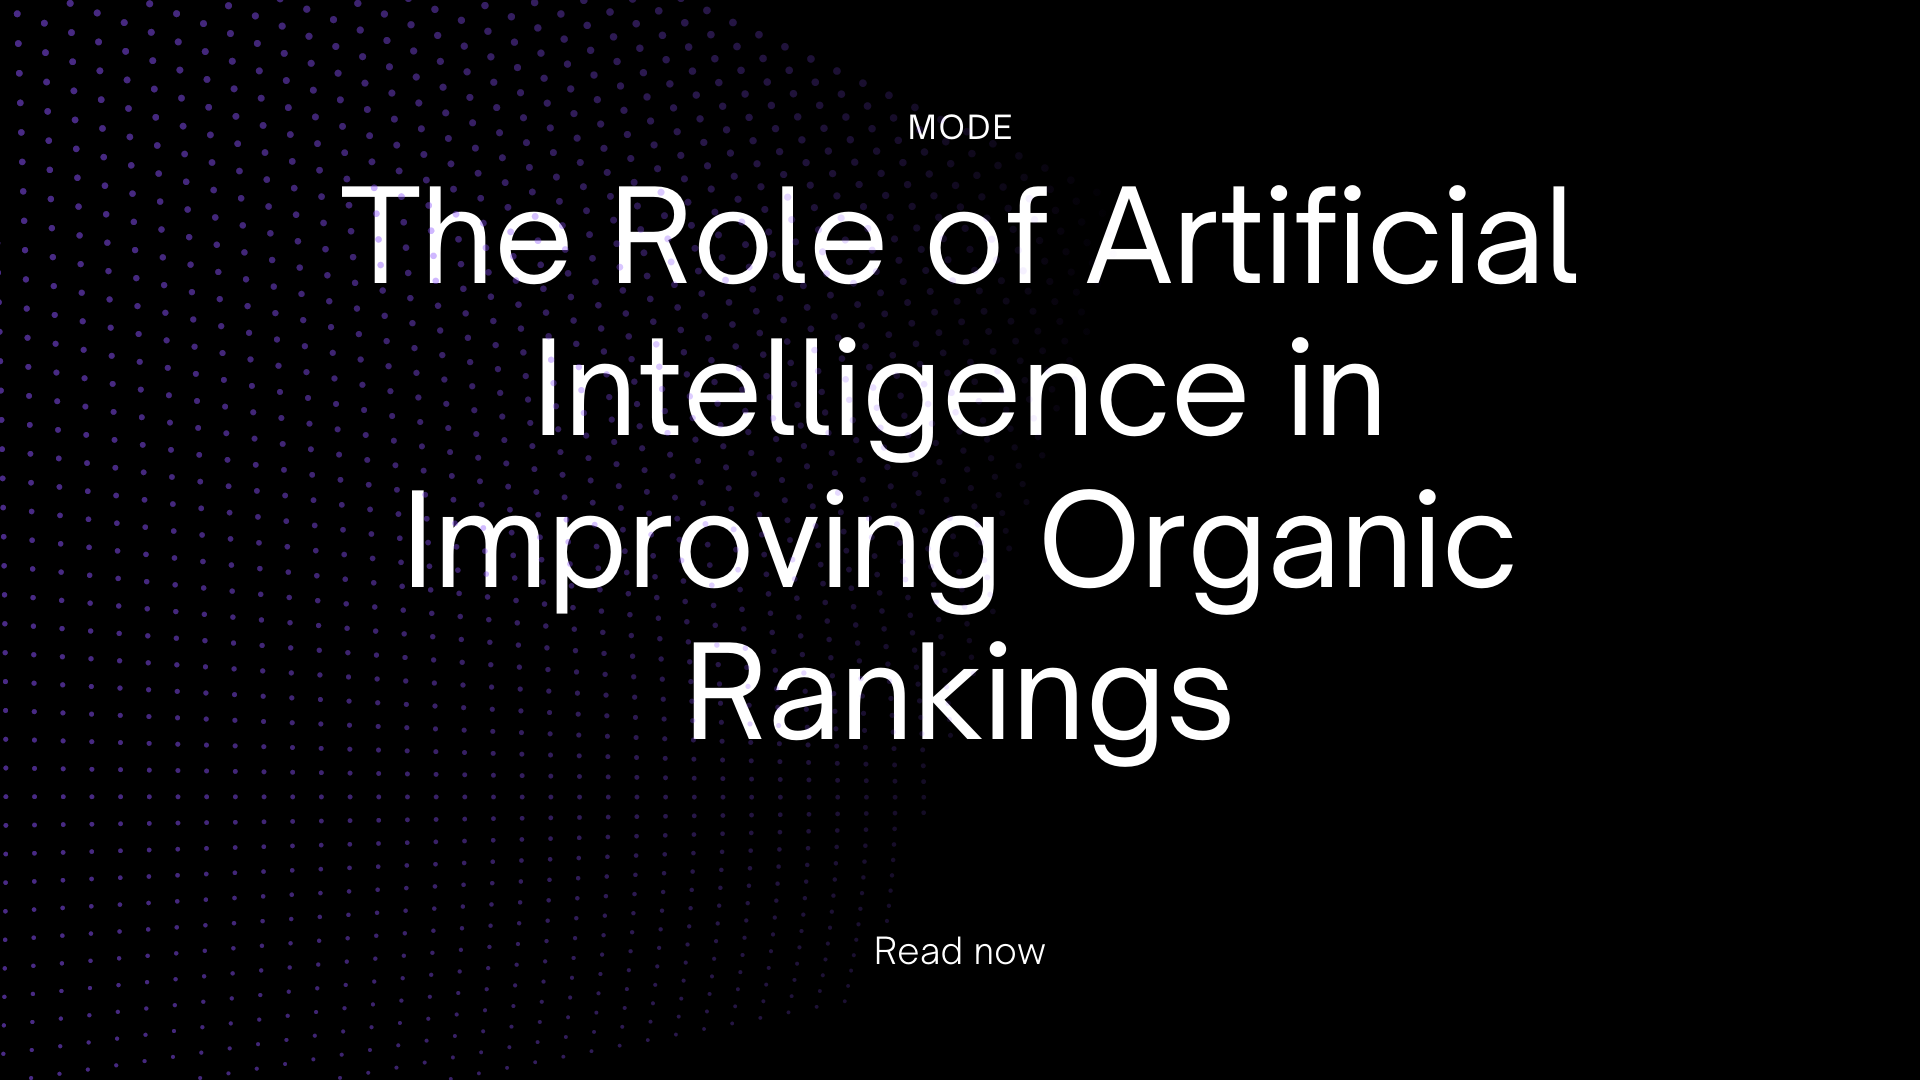 The Role of Artificial Intelligence in Improving Organic Rankings